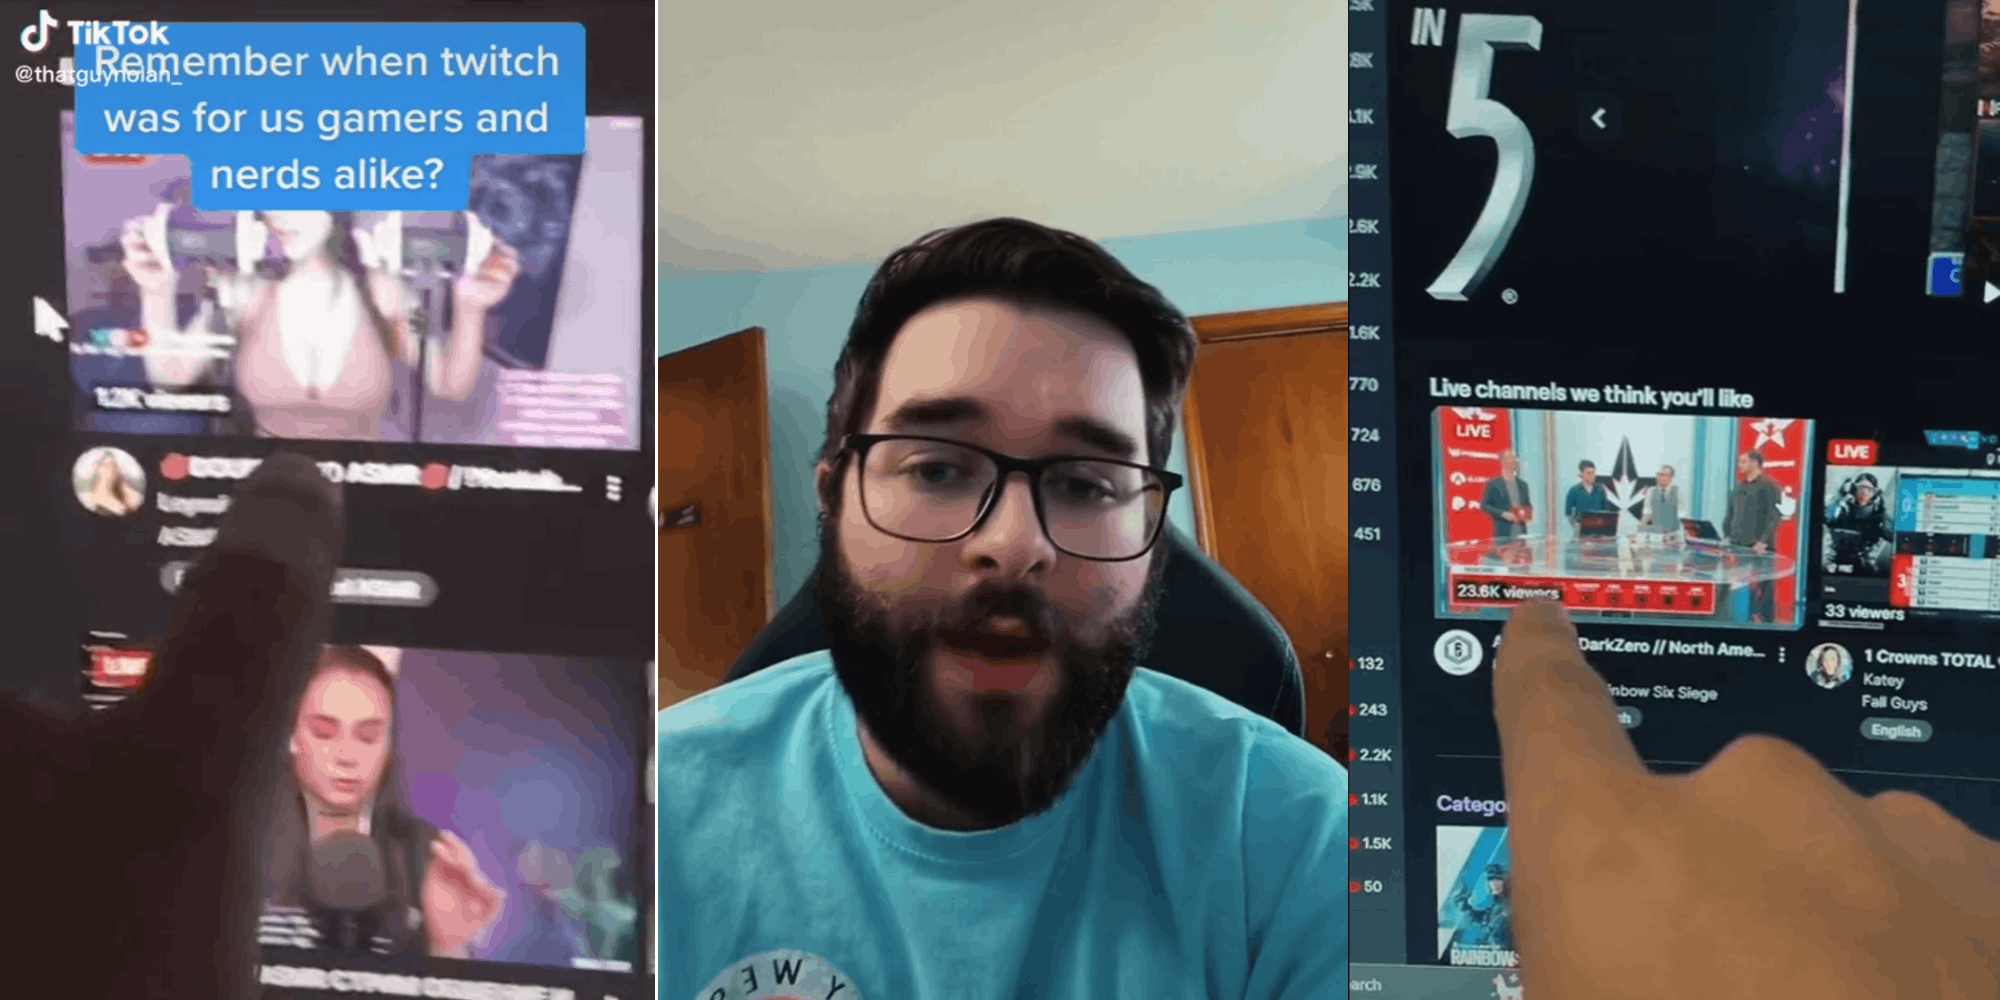 ‘You can’t complain about it when evidently you’re watching them quite a bit’: TikToker calls out Twitch’s homepage for only showing ‘tits,’ exposes himself since videos are recommended based on user behavior